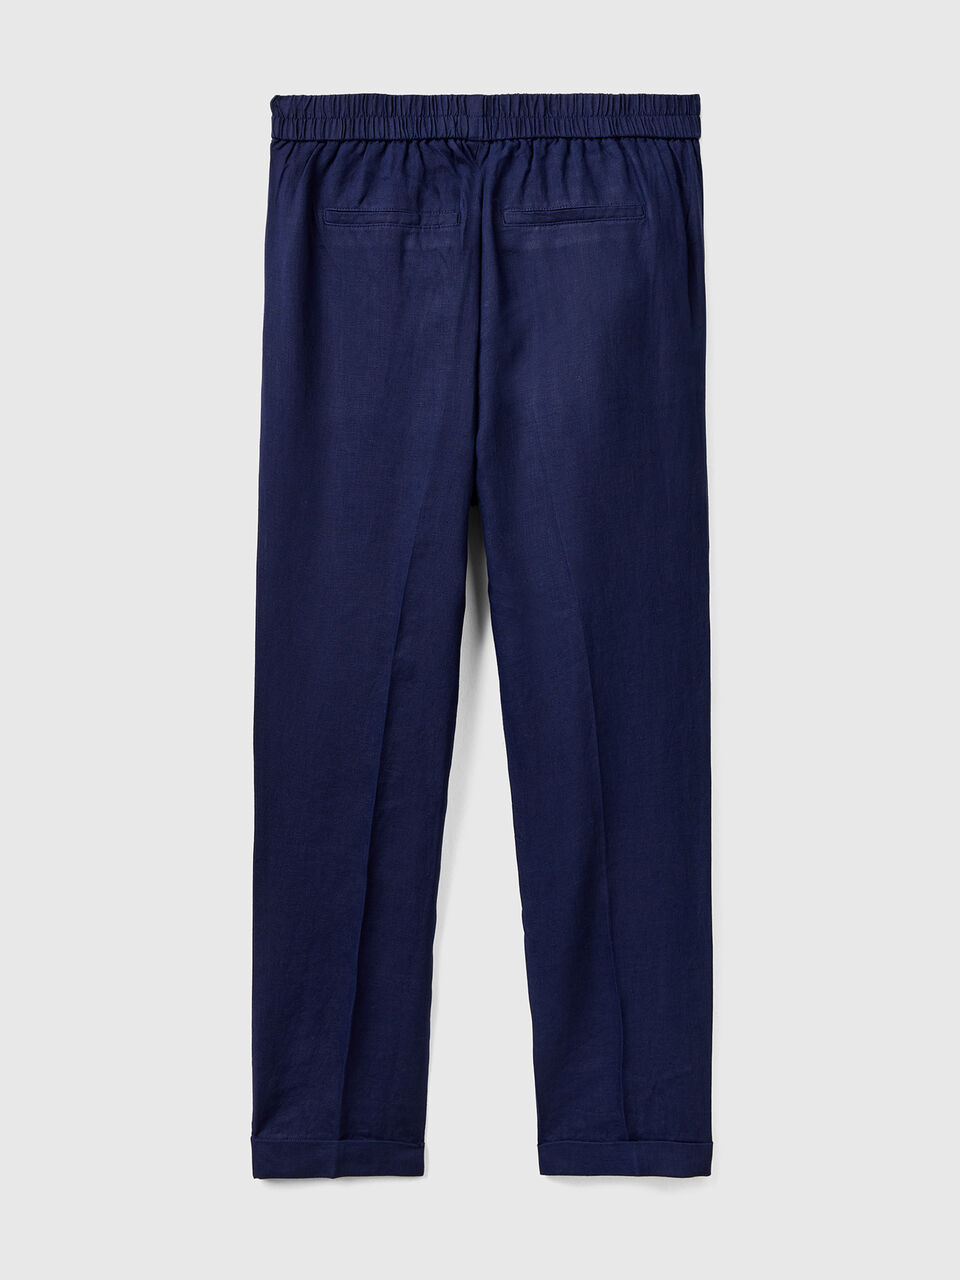 COLLUSION linen low rise beach pants in blue